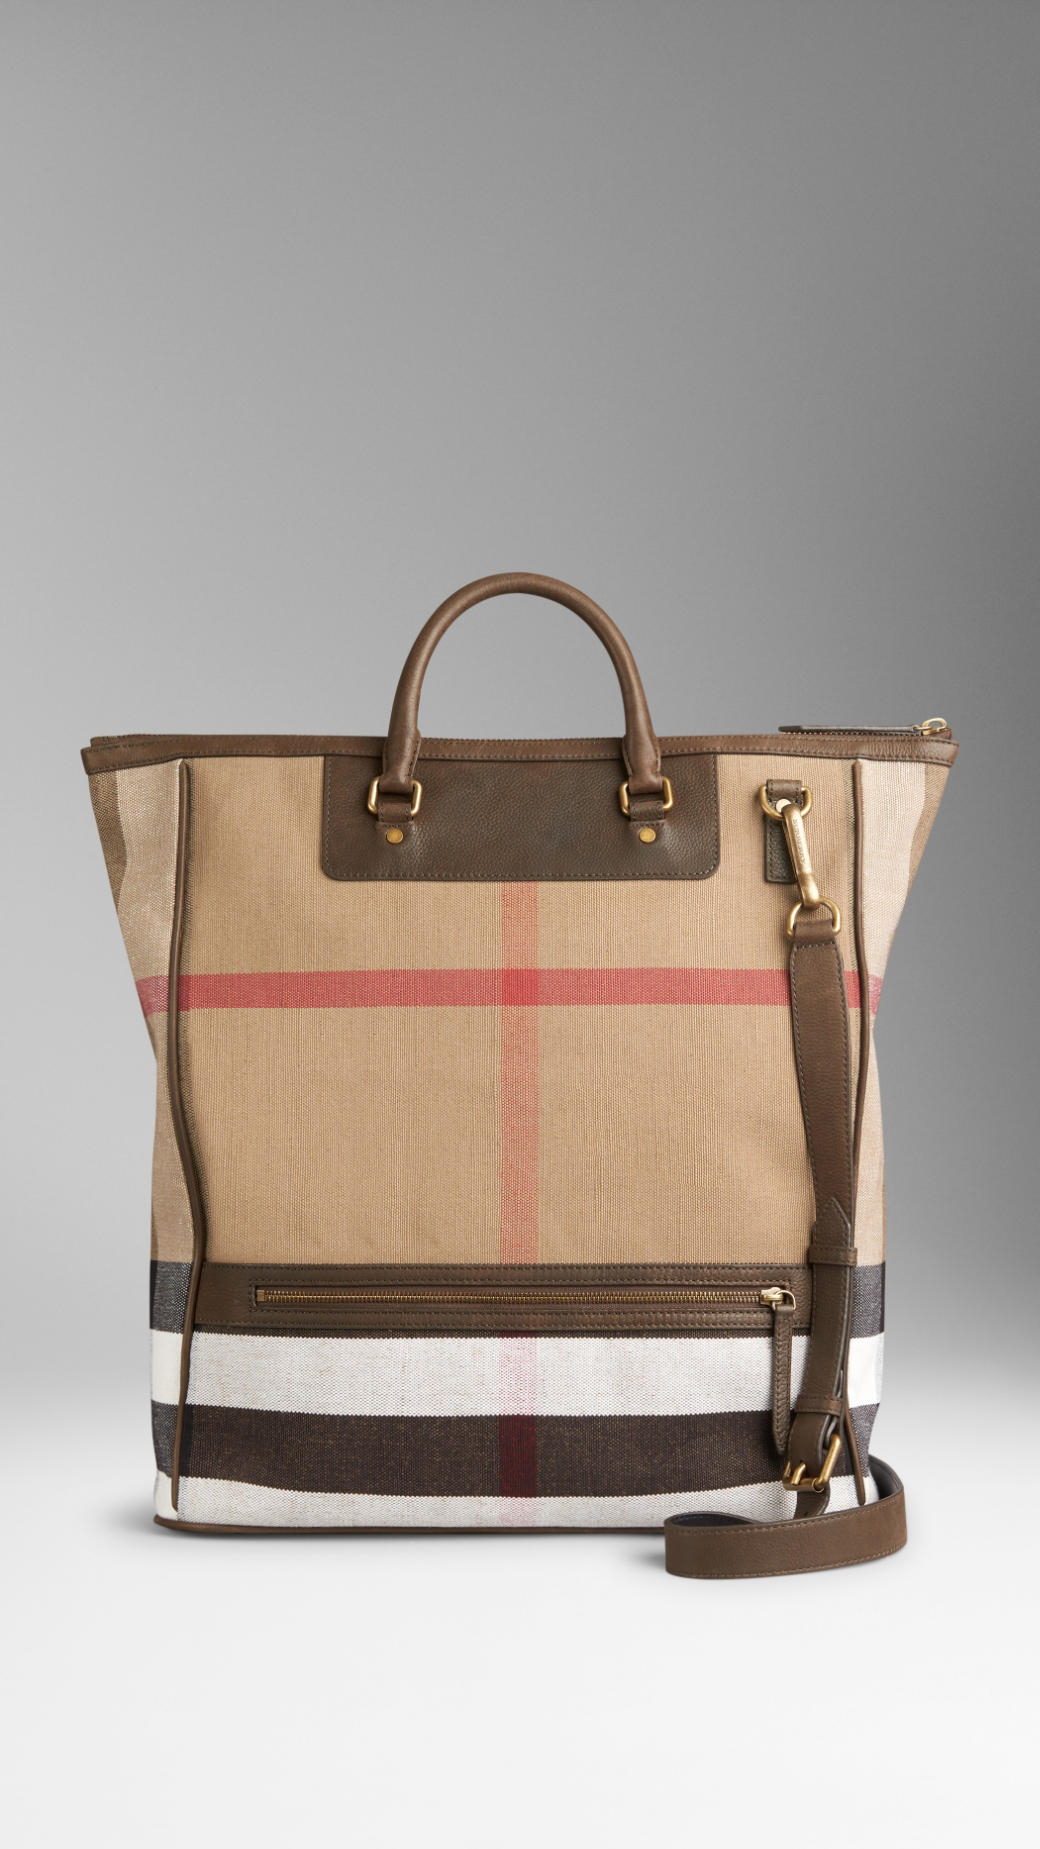 Burberry Large Canvas Check And Leather Tote Bag in Brown for Men - Lyst